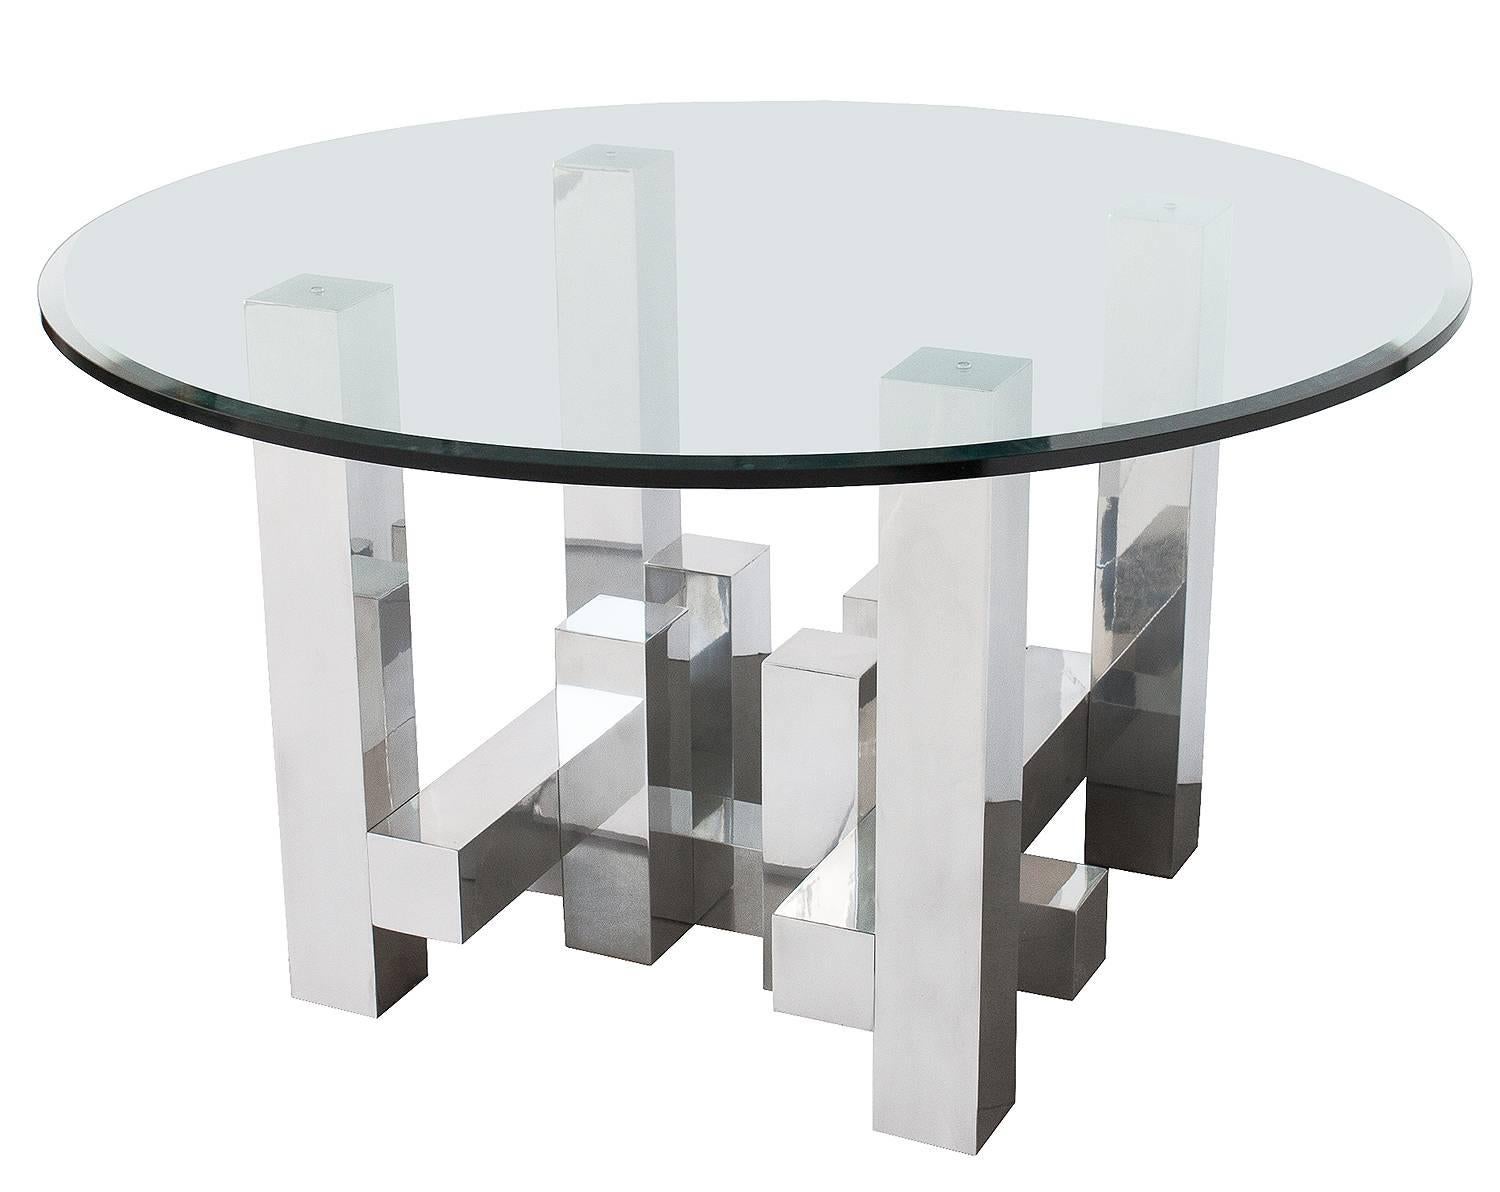 Sculptural geometric dining table base in the manner of Paul Evans' Cityscape collection for Directional Furniture. Designed by Paul Mayen for Habitat, circa 1970s. Constructed of 4" square solid polished aluminium hollow beams configured